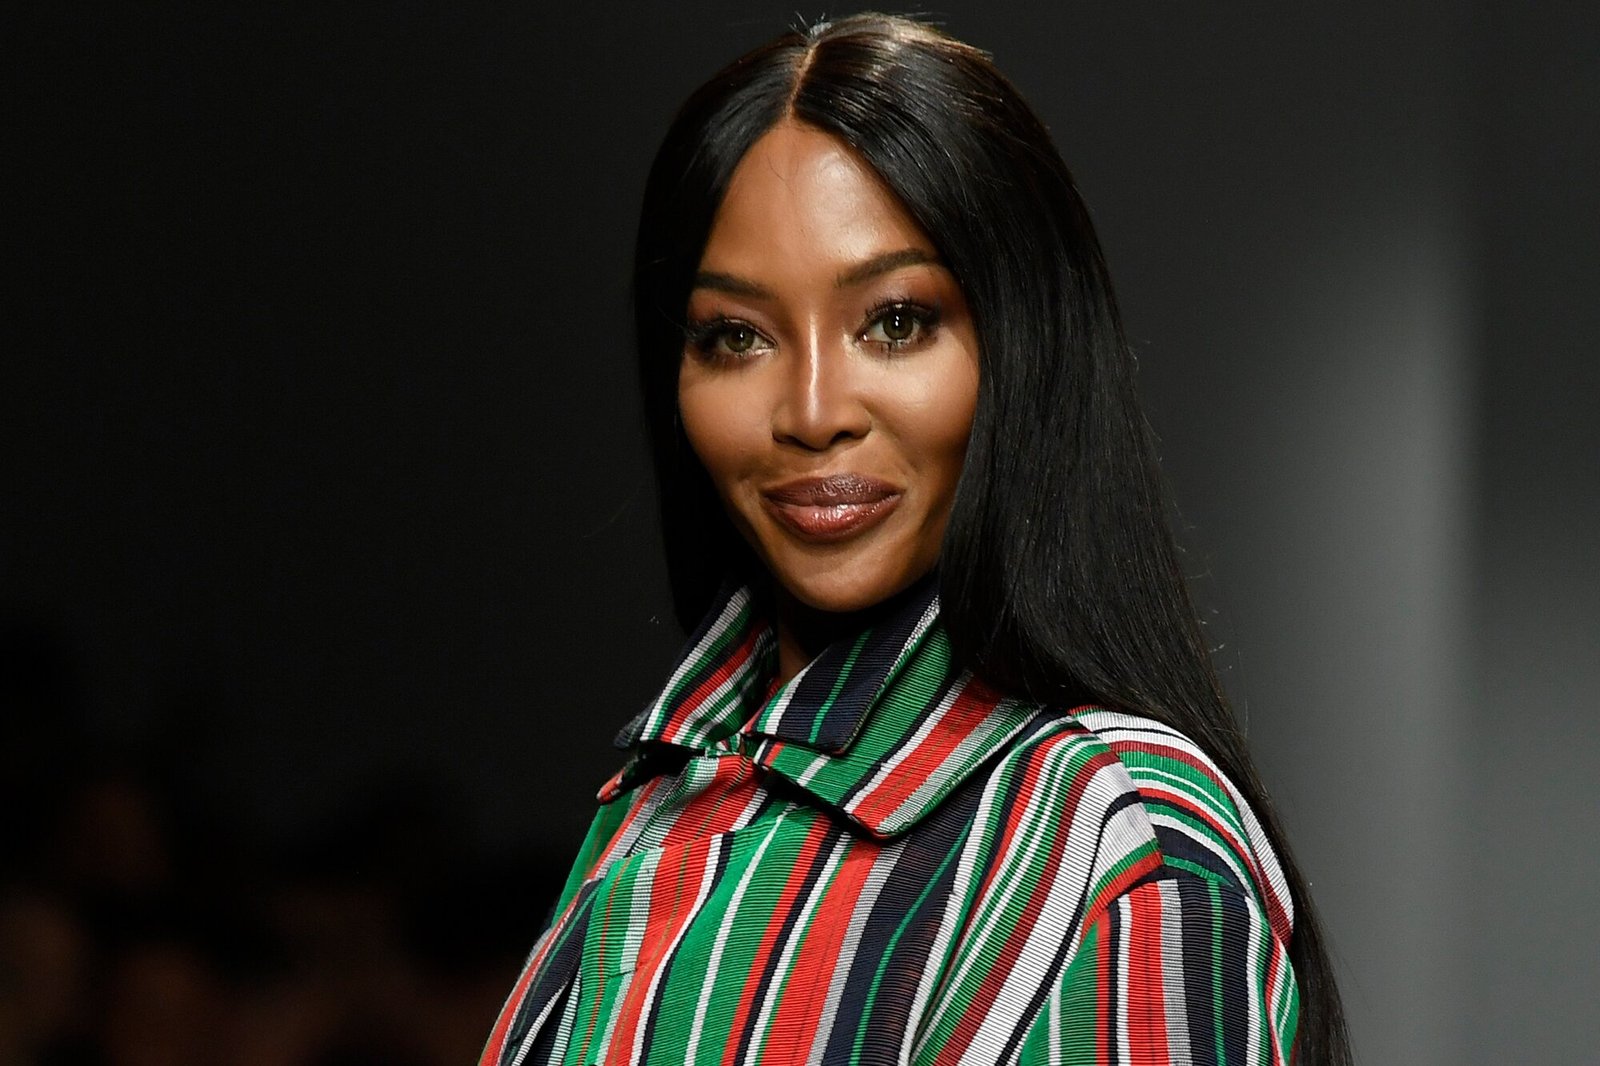 Black Panther - Naomi Campbell: "You should make mistakes! It's a way to gain experience and wisdom"